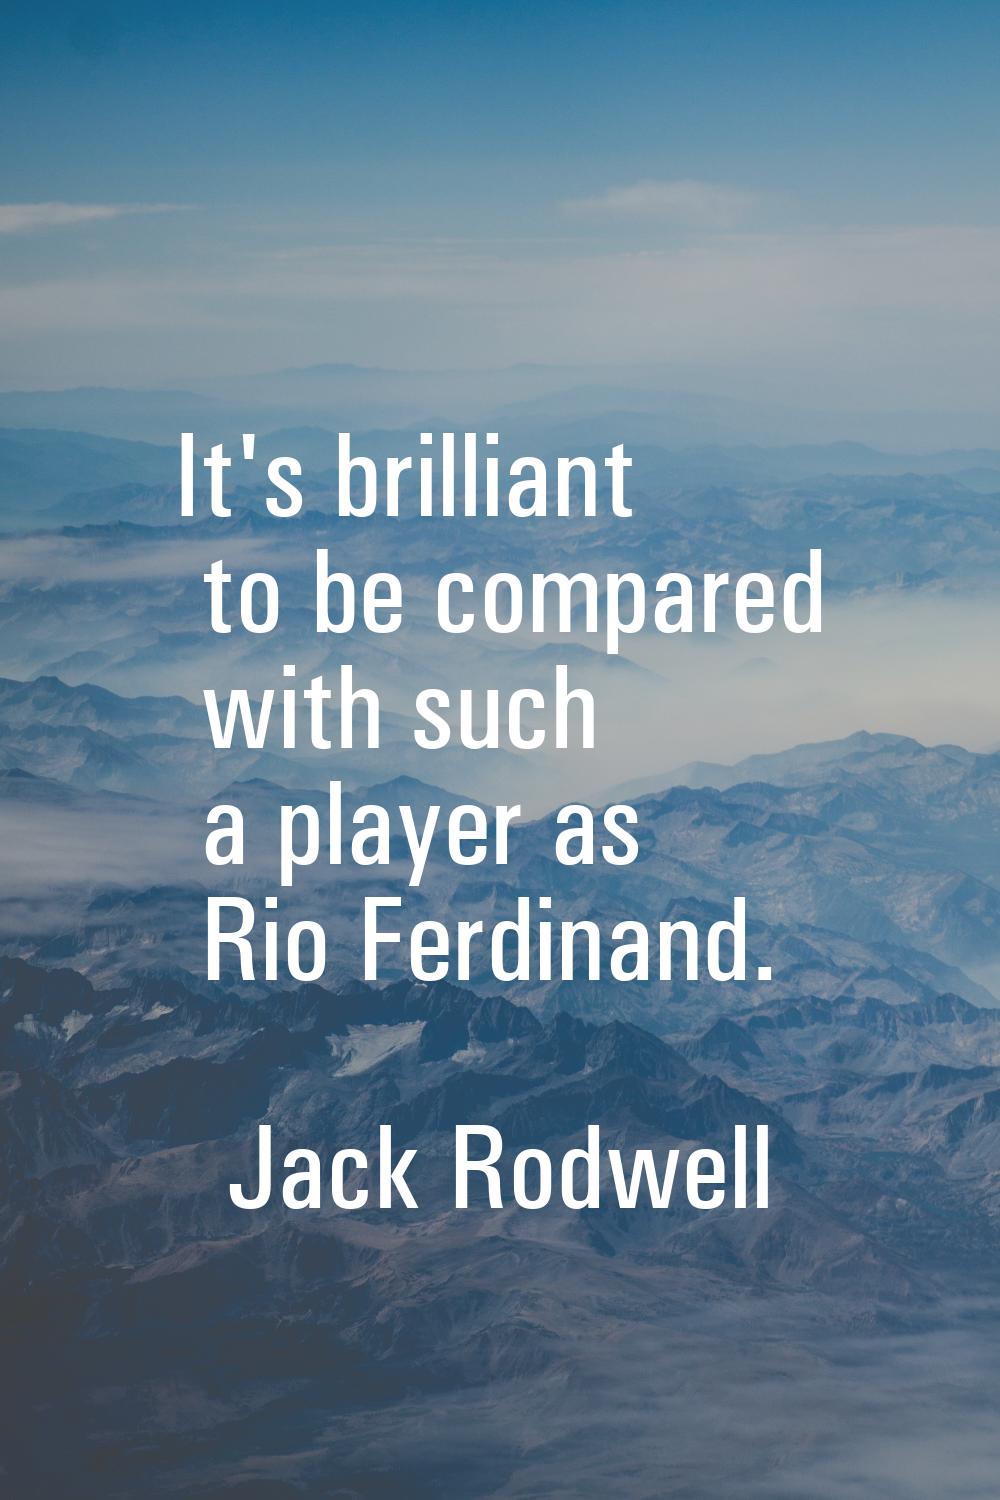 It's brilliant to be compared with such a player as Rio Ferdinand.